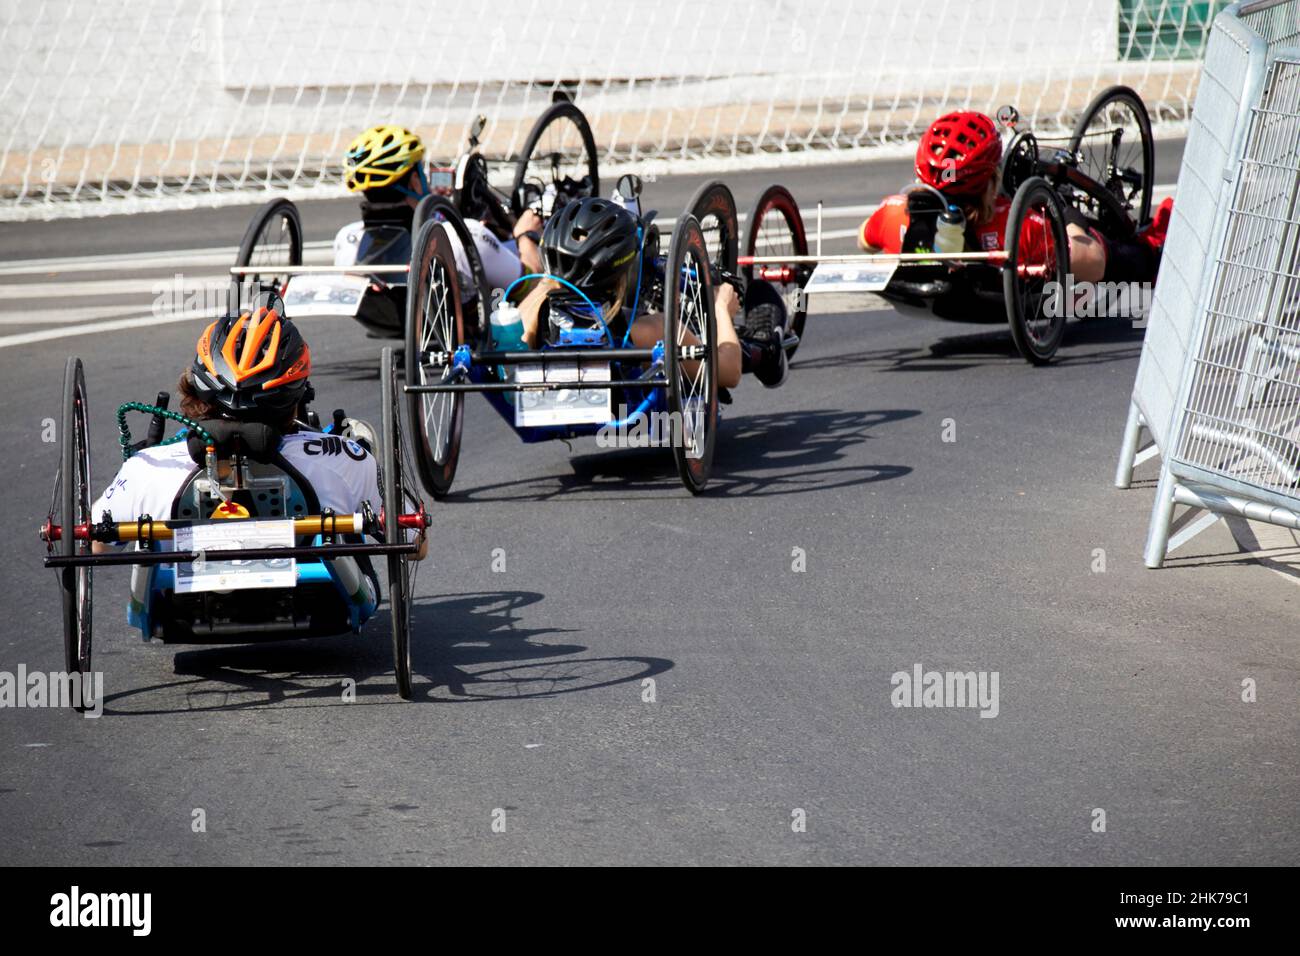 competitors racing in the ehc paracycling handcycling road race handbike playa blanca Lanzarote Canary Islands Spain Stock Photo